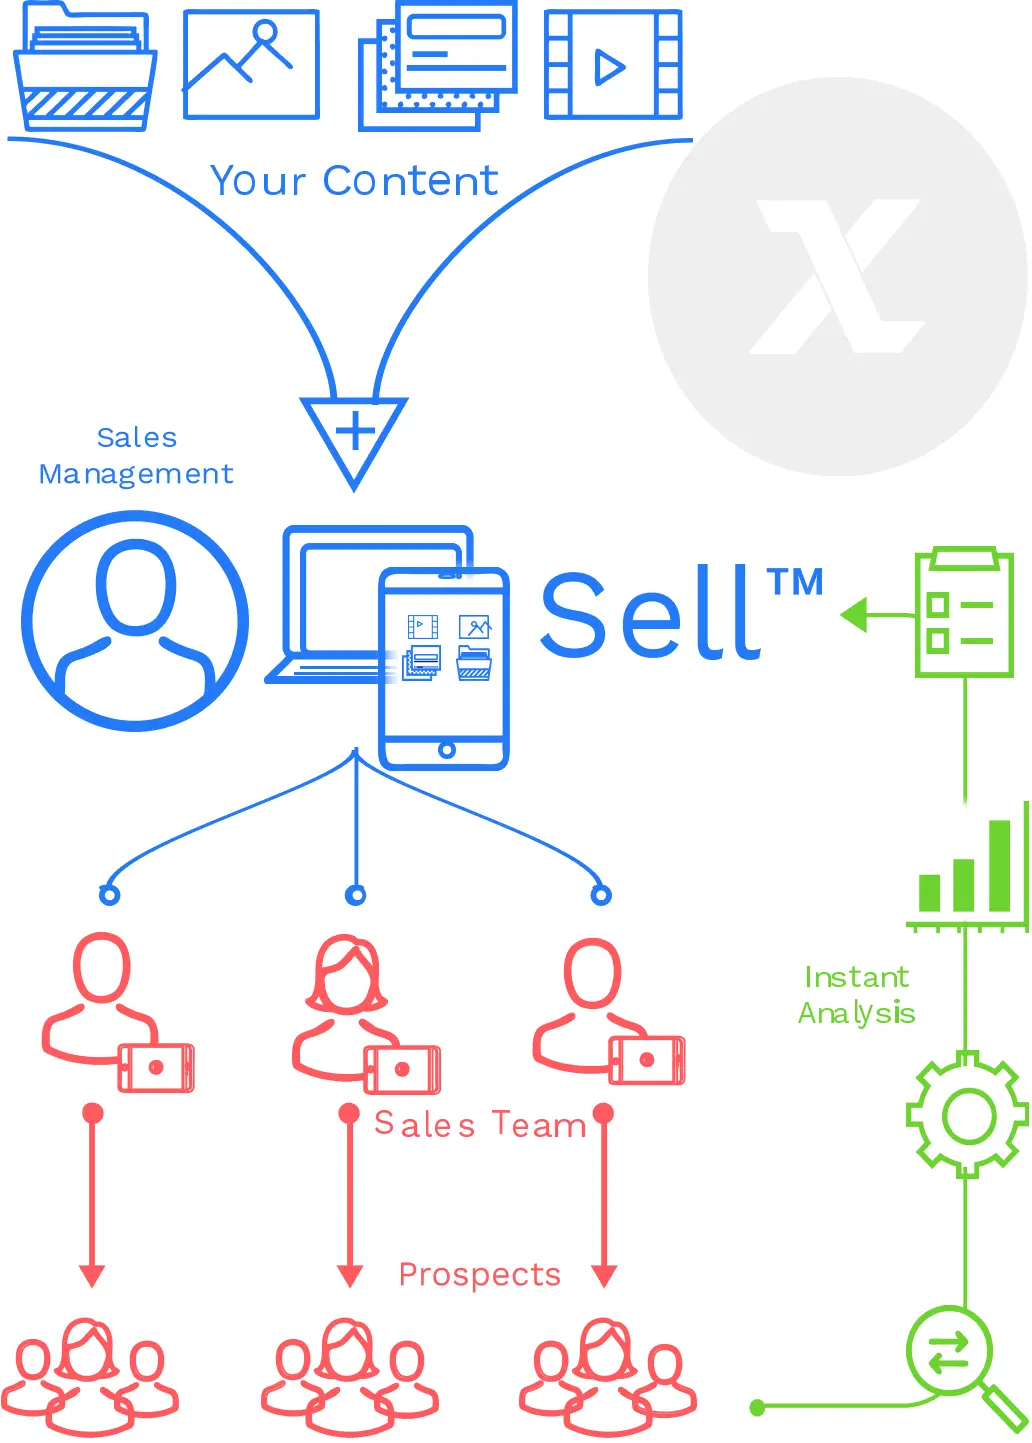 How Sell™ Works
